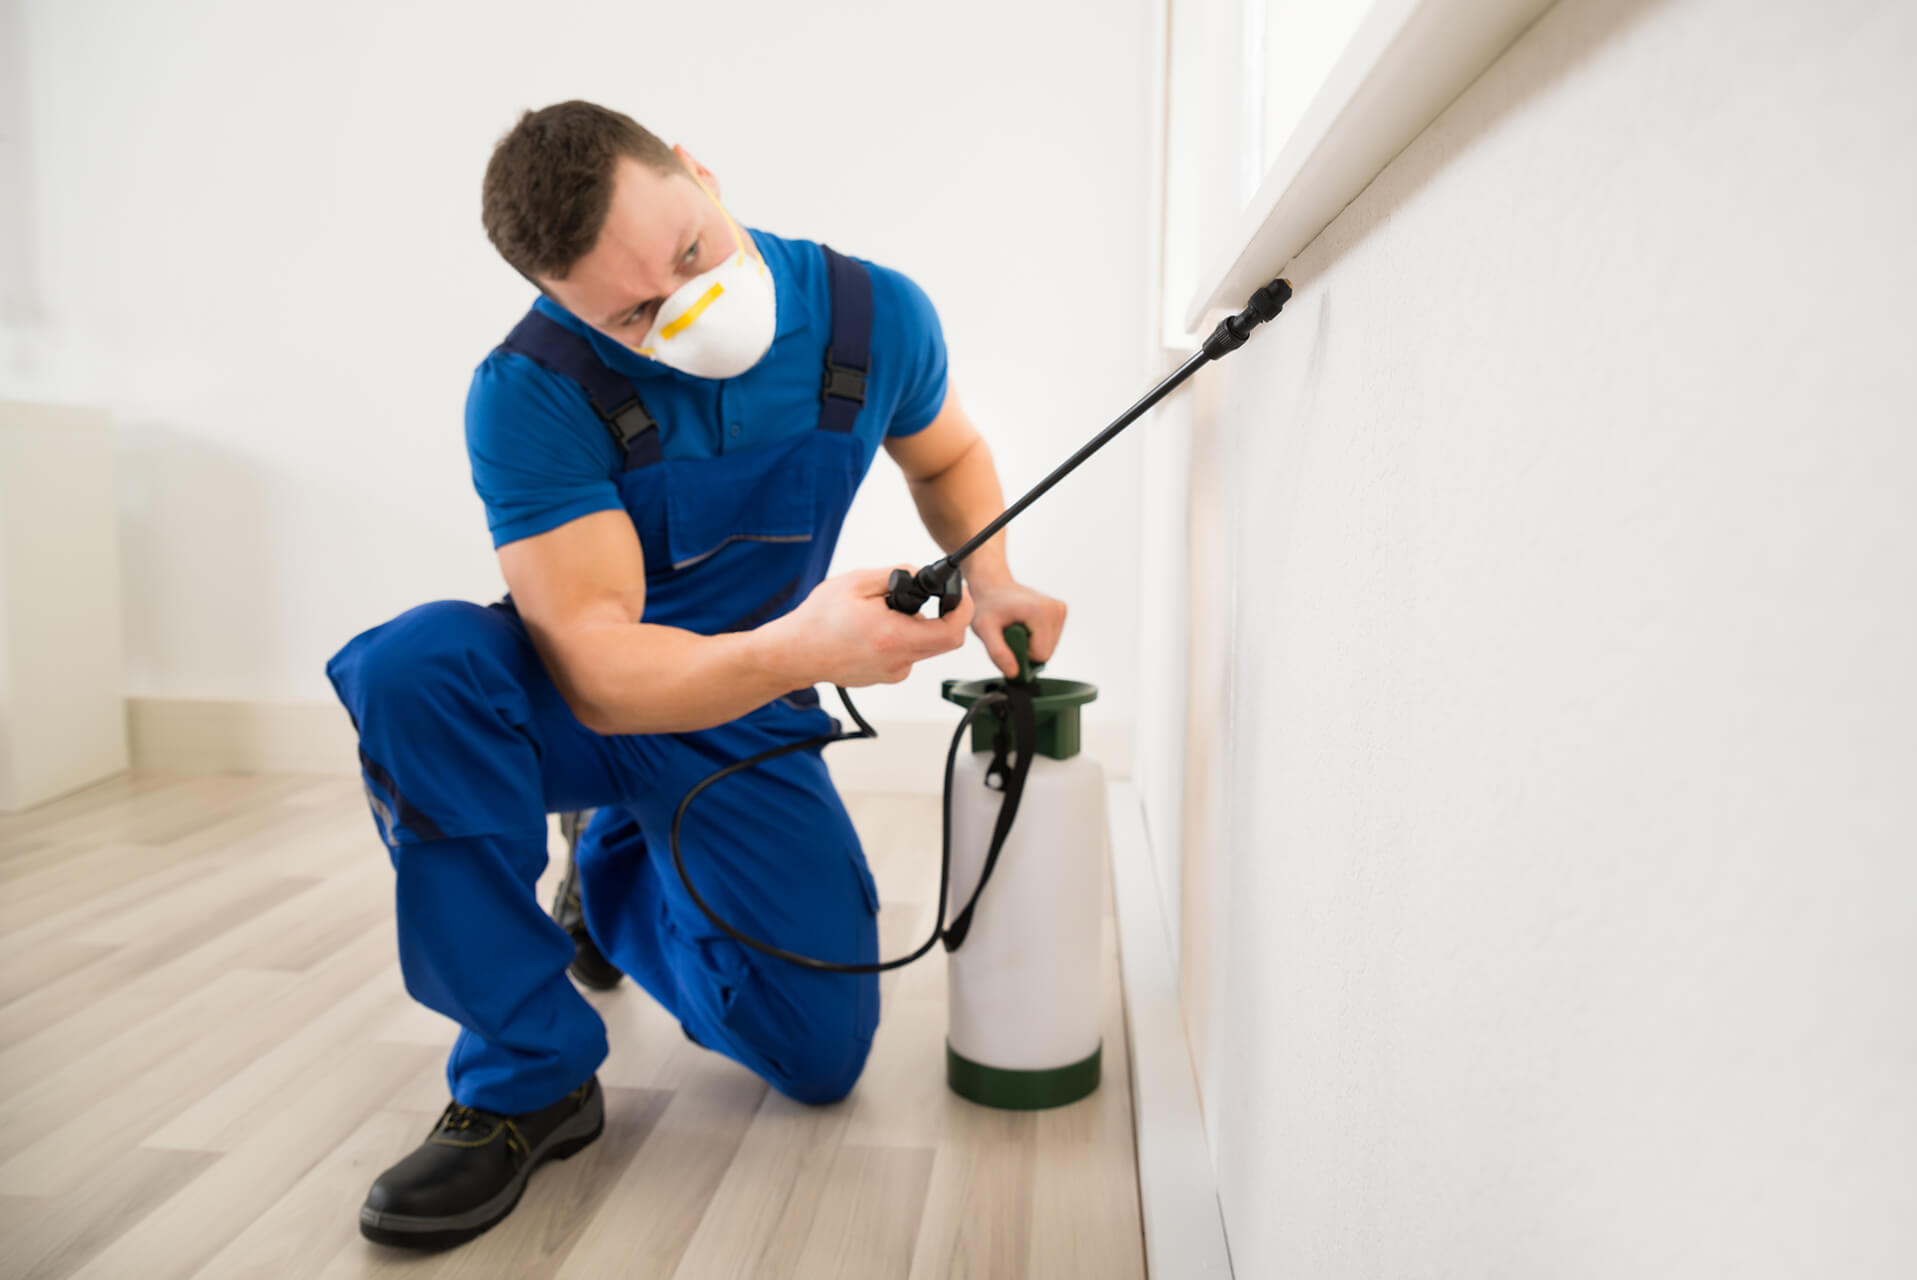 Pest Control Lewisville pest control services in Lewisville Denton or nearby cities in Denton County GA flea 2